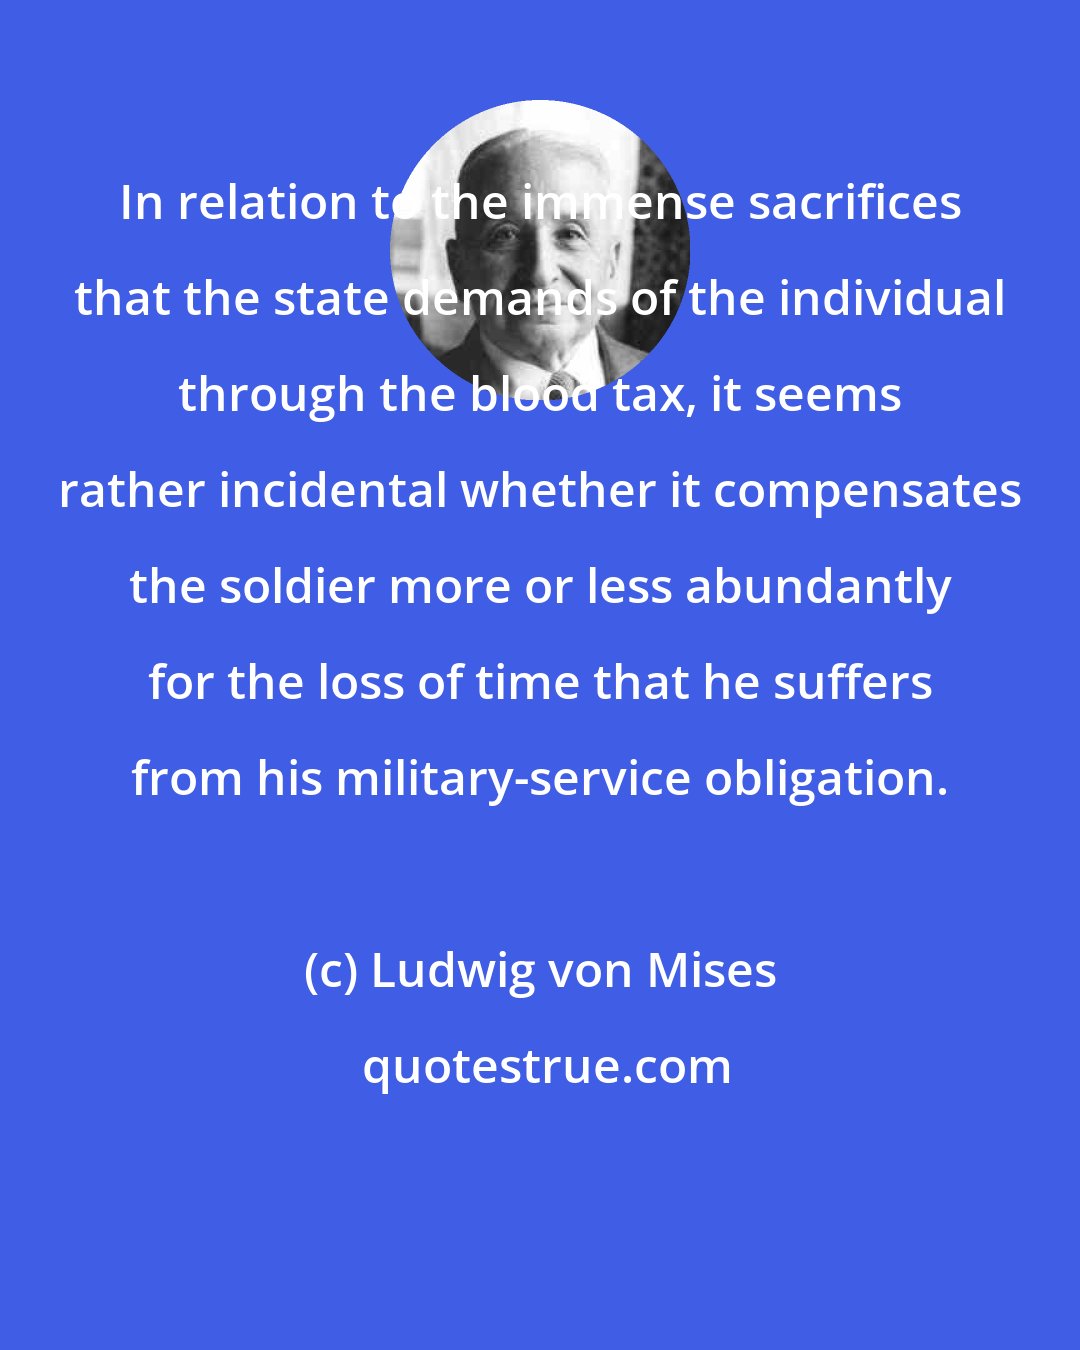 Ludwig von Mises: In relation to the immense sacrifices that the state demands of the individual through the blood tax, it seems rather incidental whether it compensates the soldier more or less abundantly for the loss of time that he suffers from his military-service obligation.